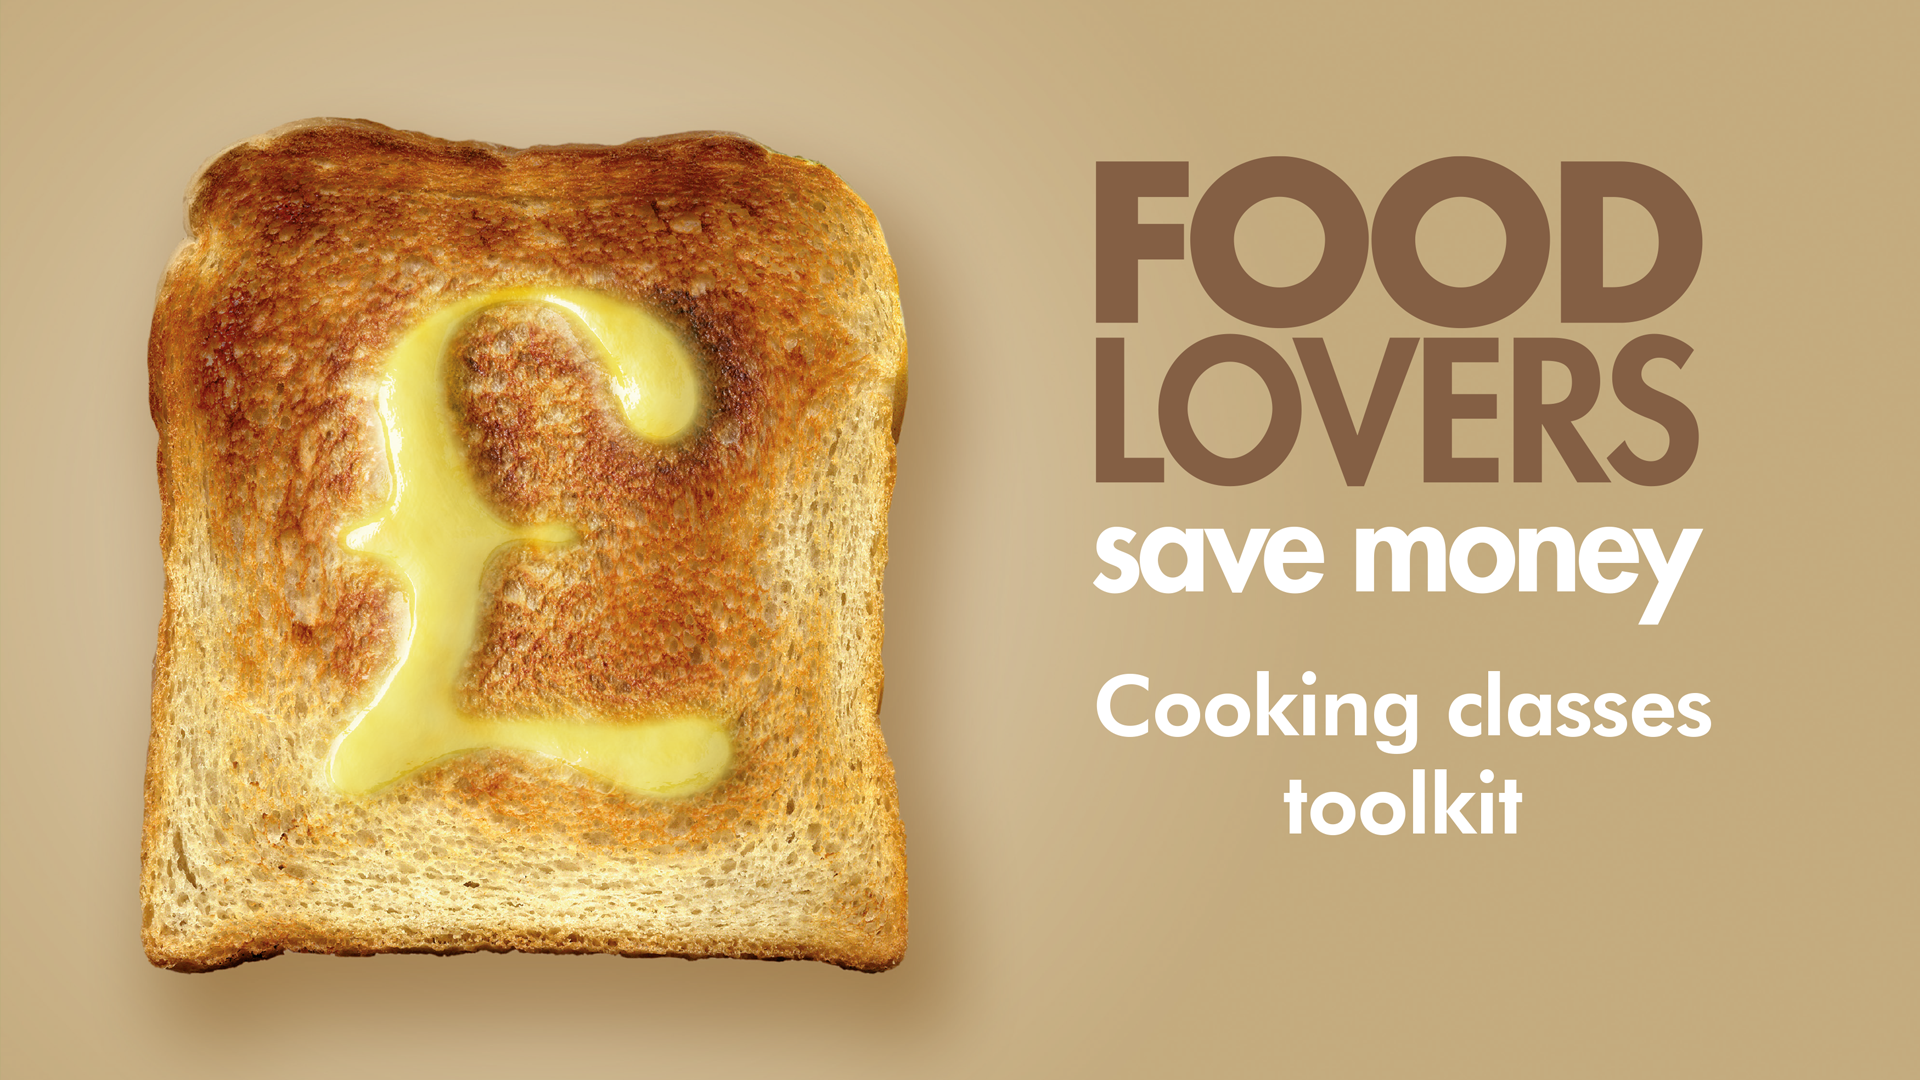 An image of toast with butter in the shape of a pound sign.  The text says 'food lovers save money' - 'cooking classes toolkit'.